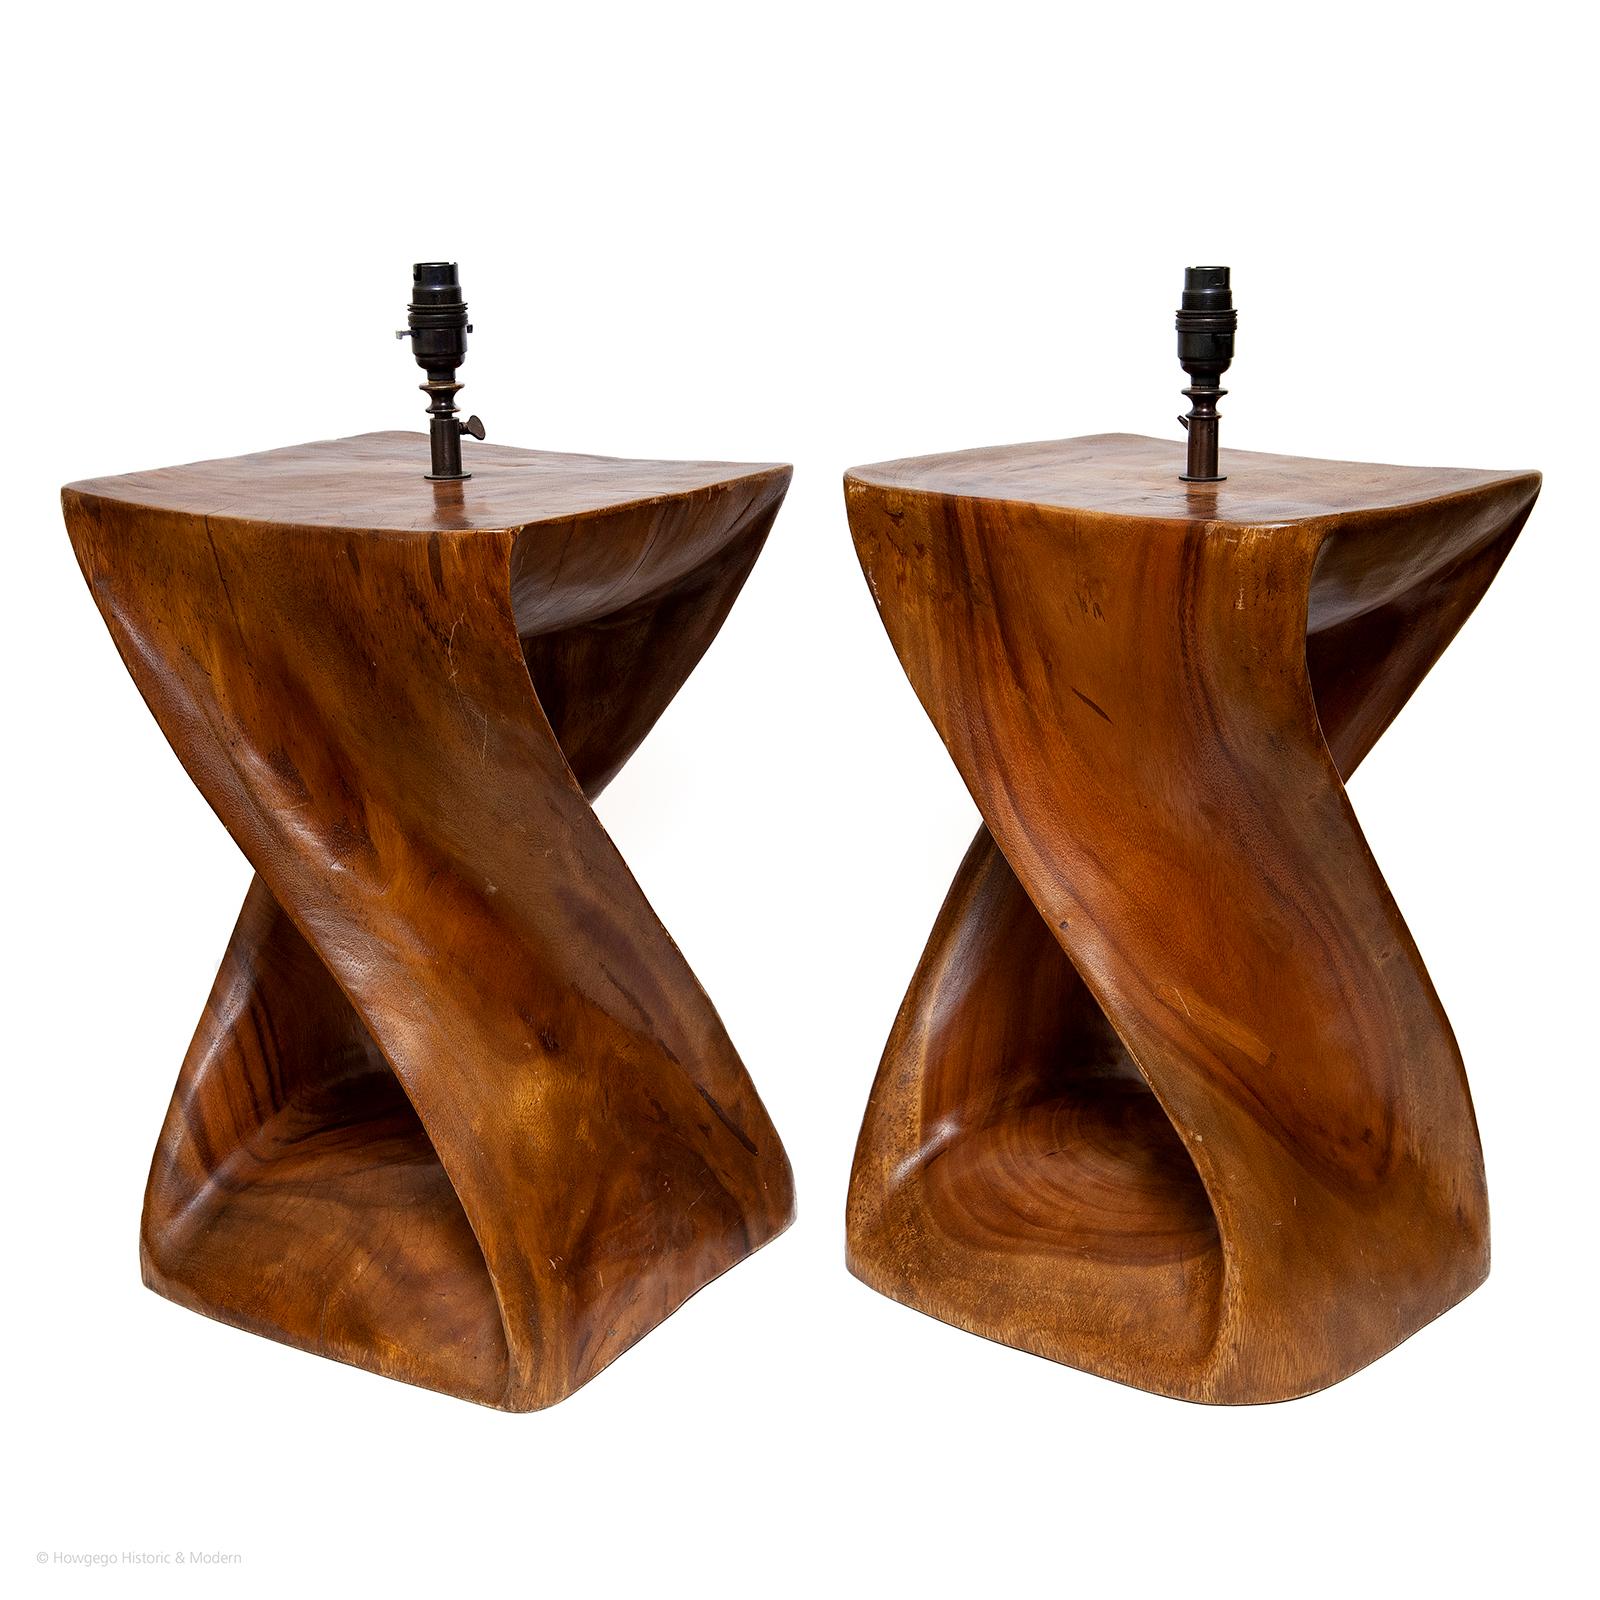 RARE PAIR OF VINTAGE, HARDWOOD SCULPTURES UPCYCLED INTO TABLE LAMPS, 21” HIGH
Naturalistic with fluid form
Carved from one block
The sides delicately fold into each other appearing flexible and  fluid and showing the fine figuring of the